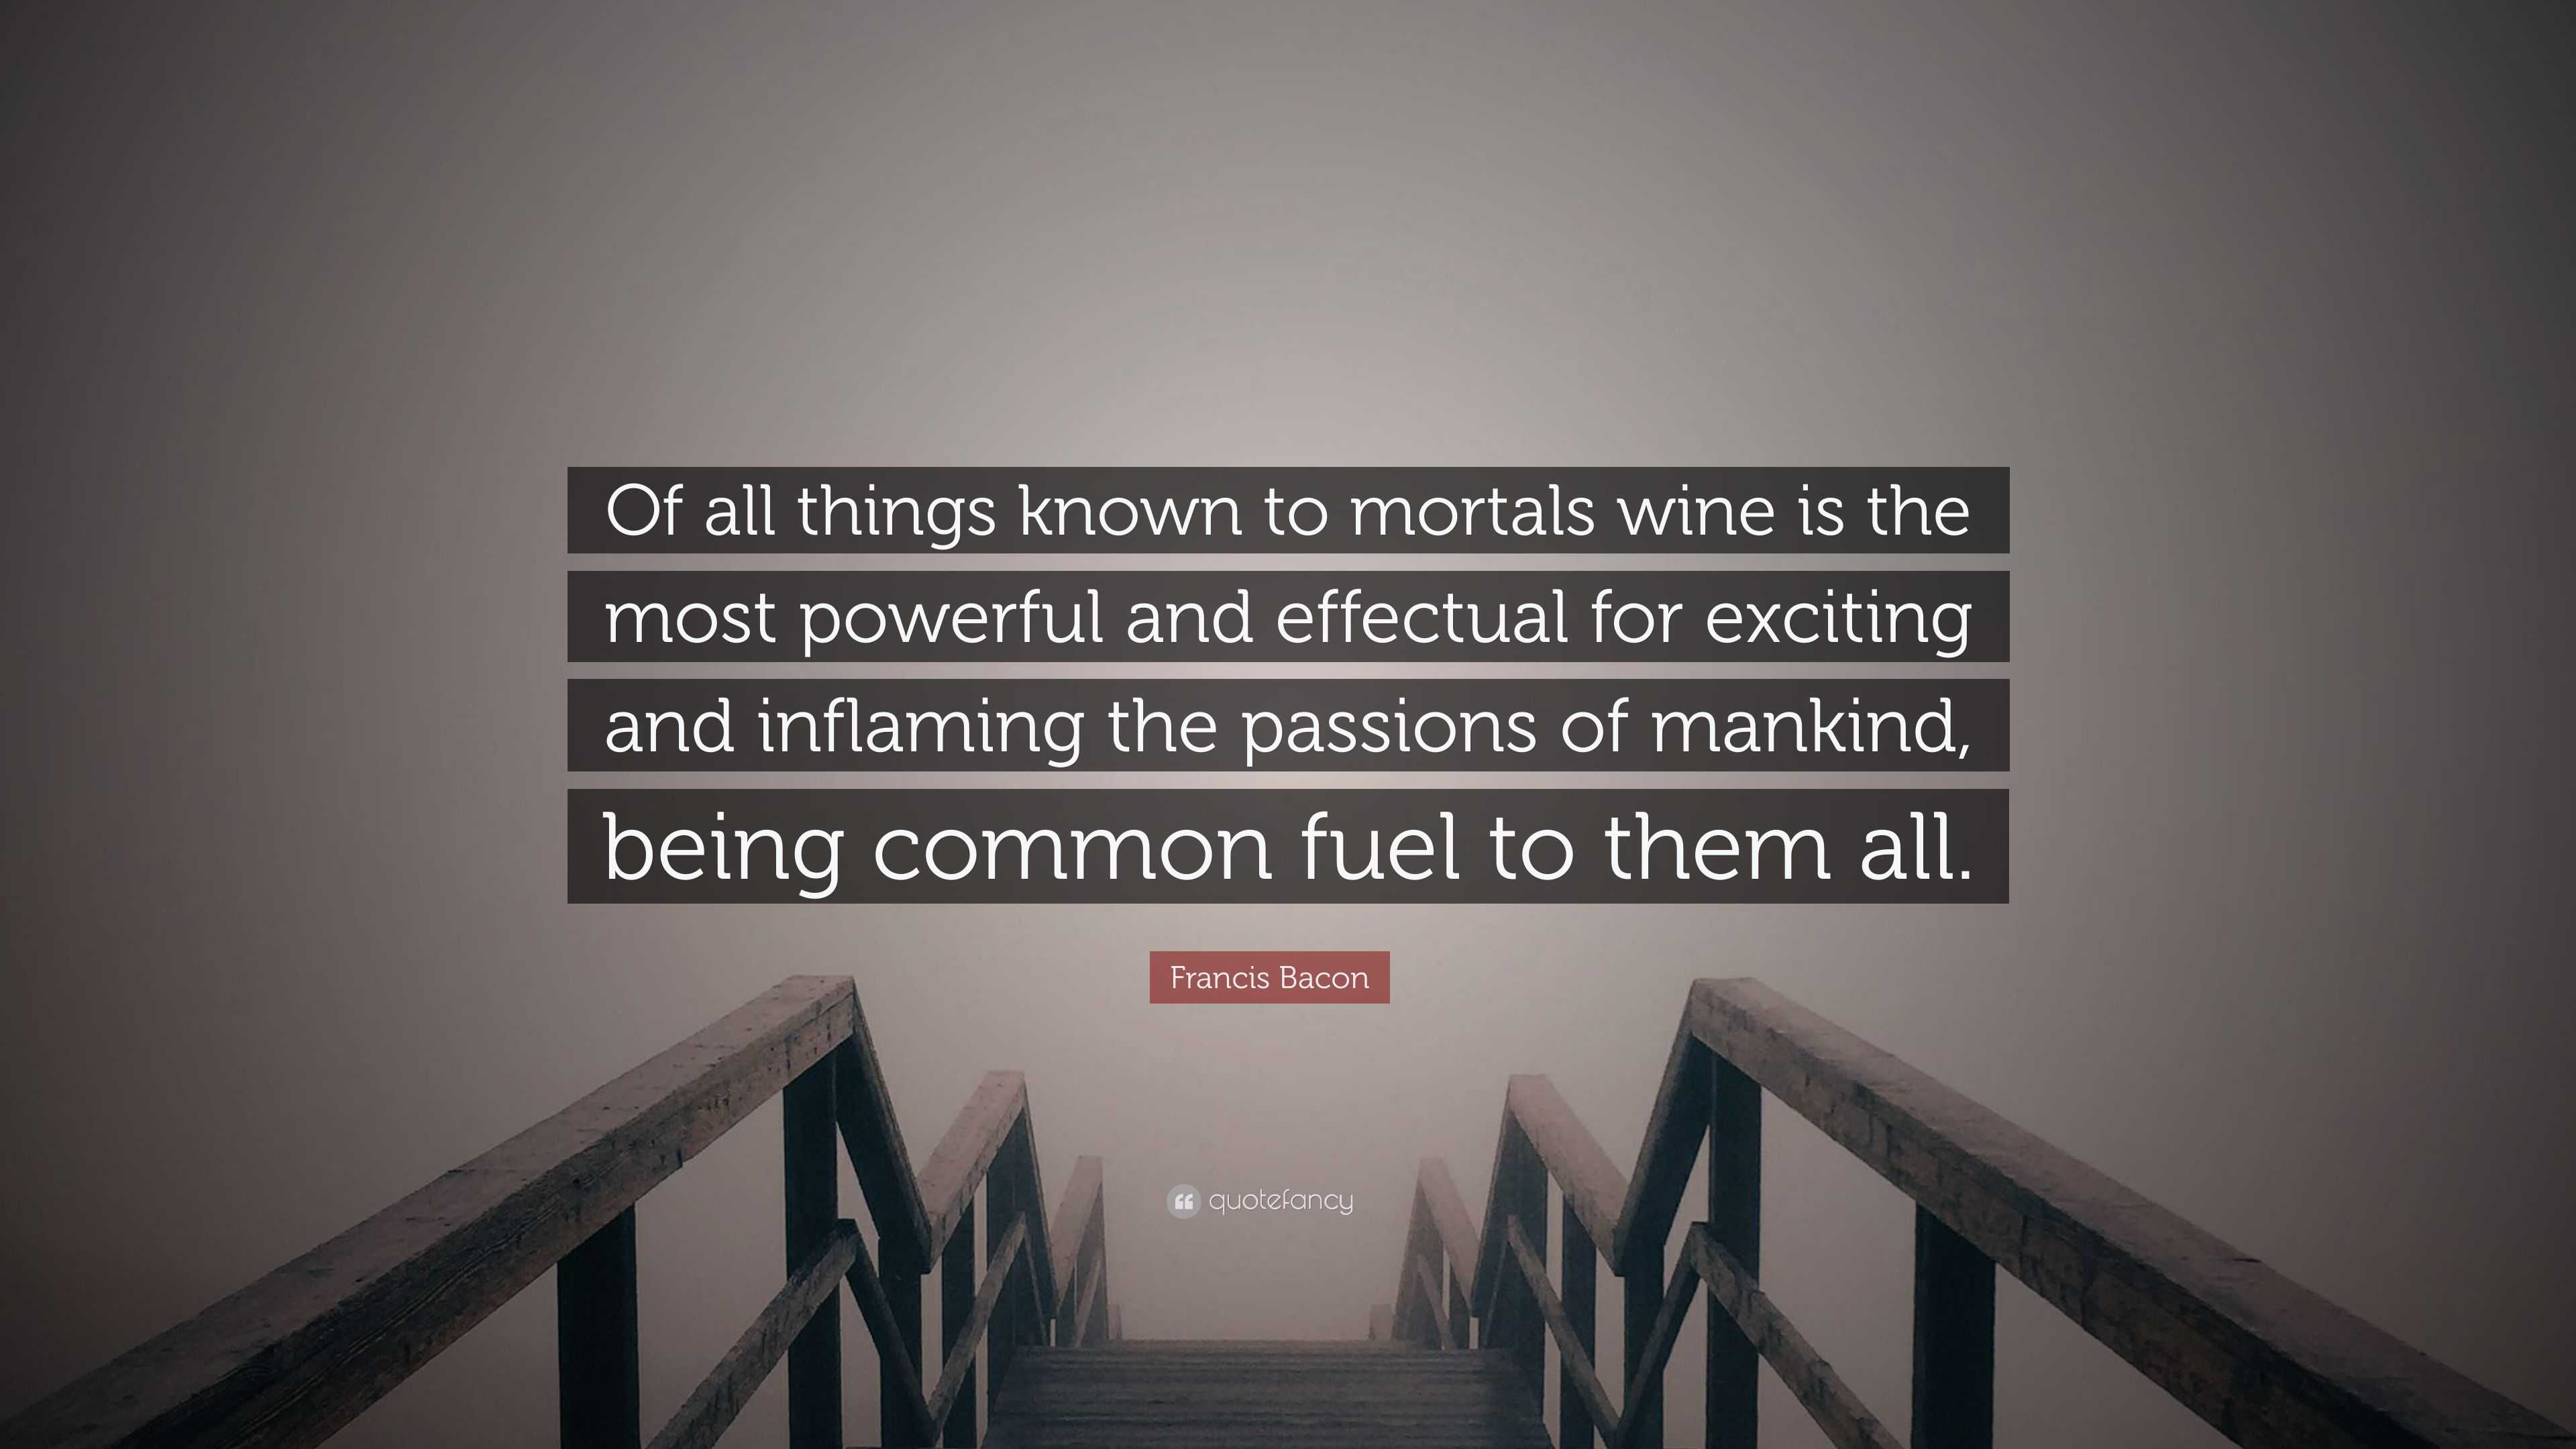 Francis Bacon Quote “of All Things Known To Mortals Wine Is The Most